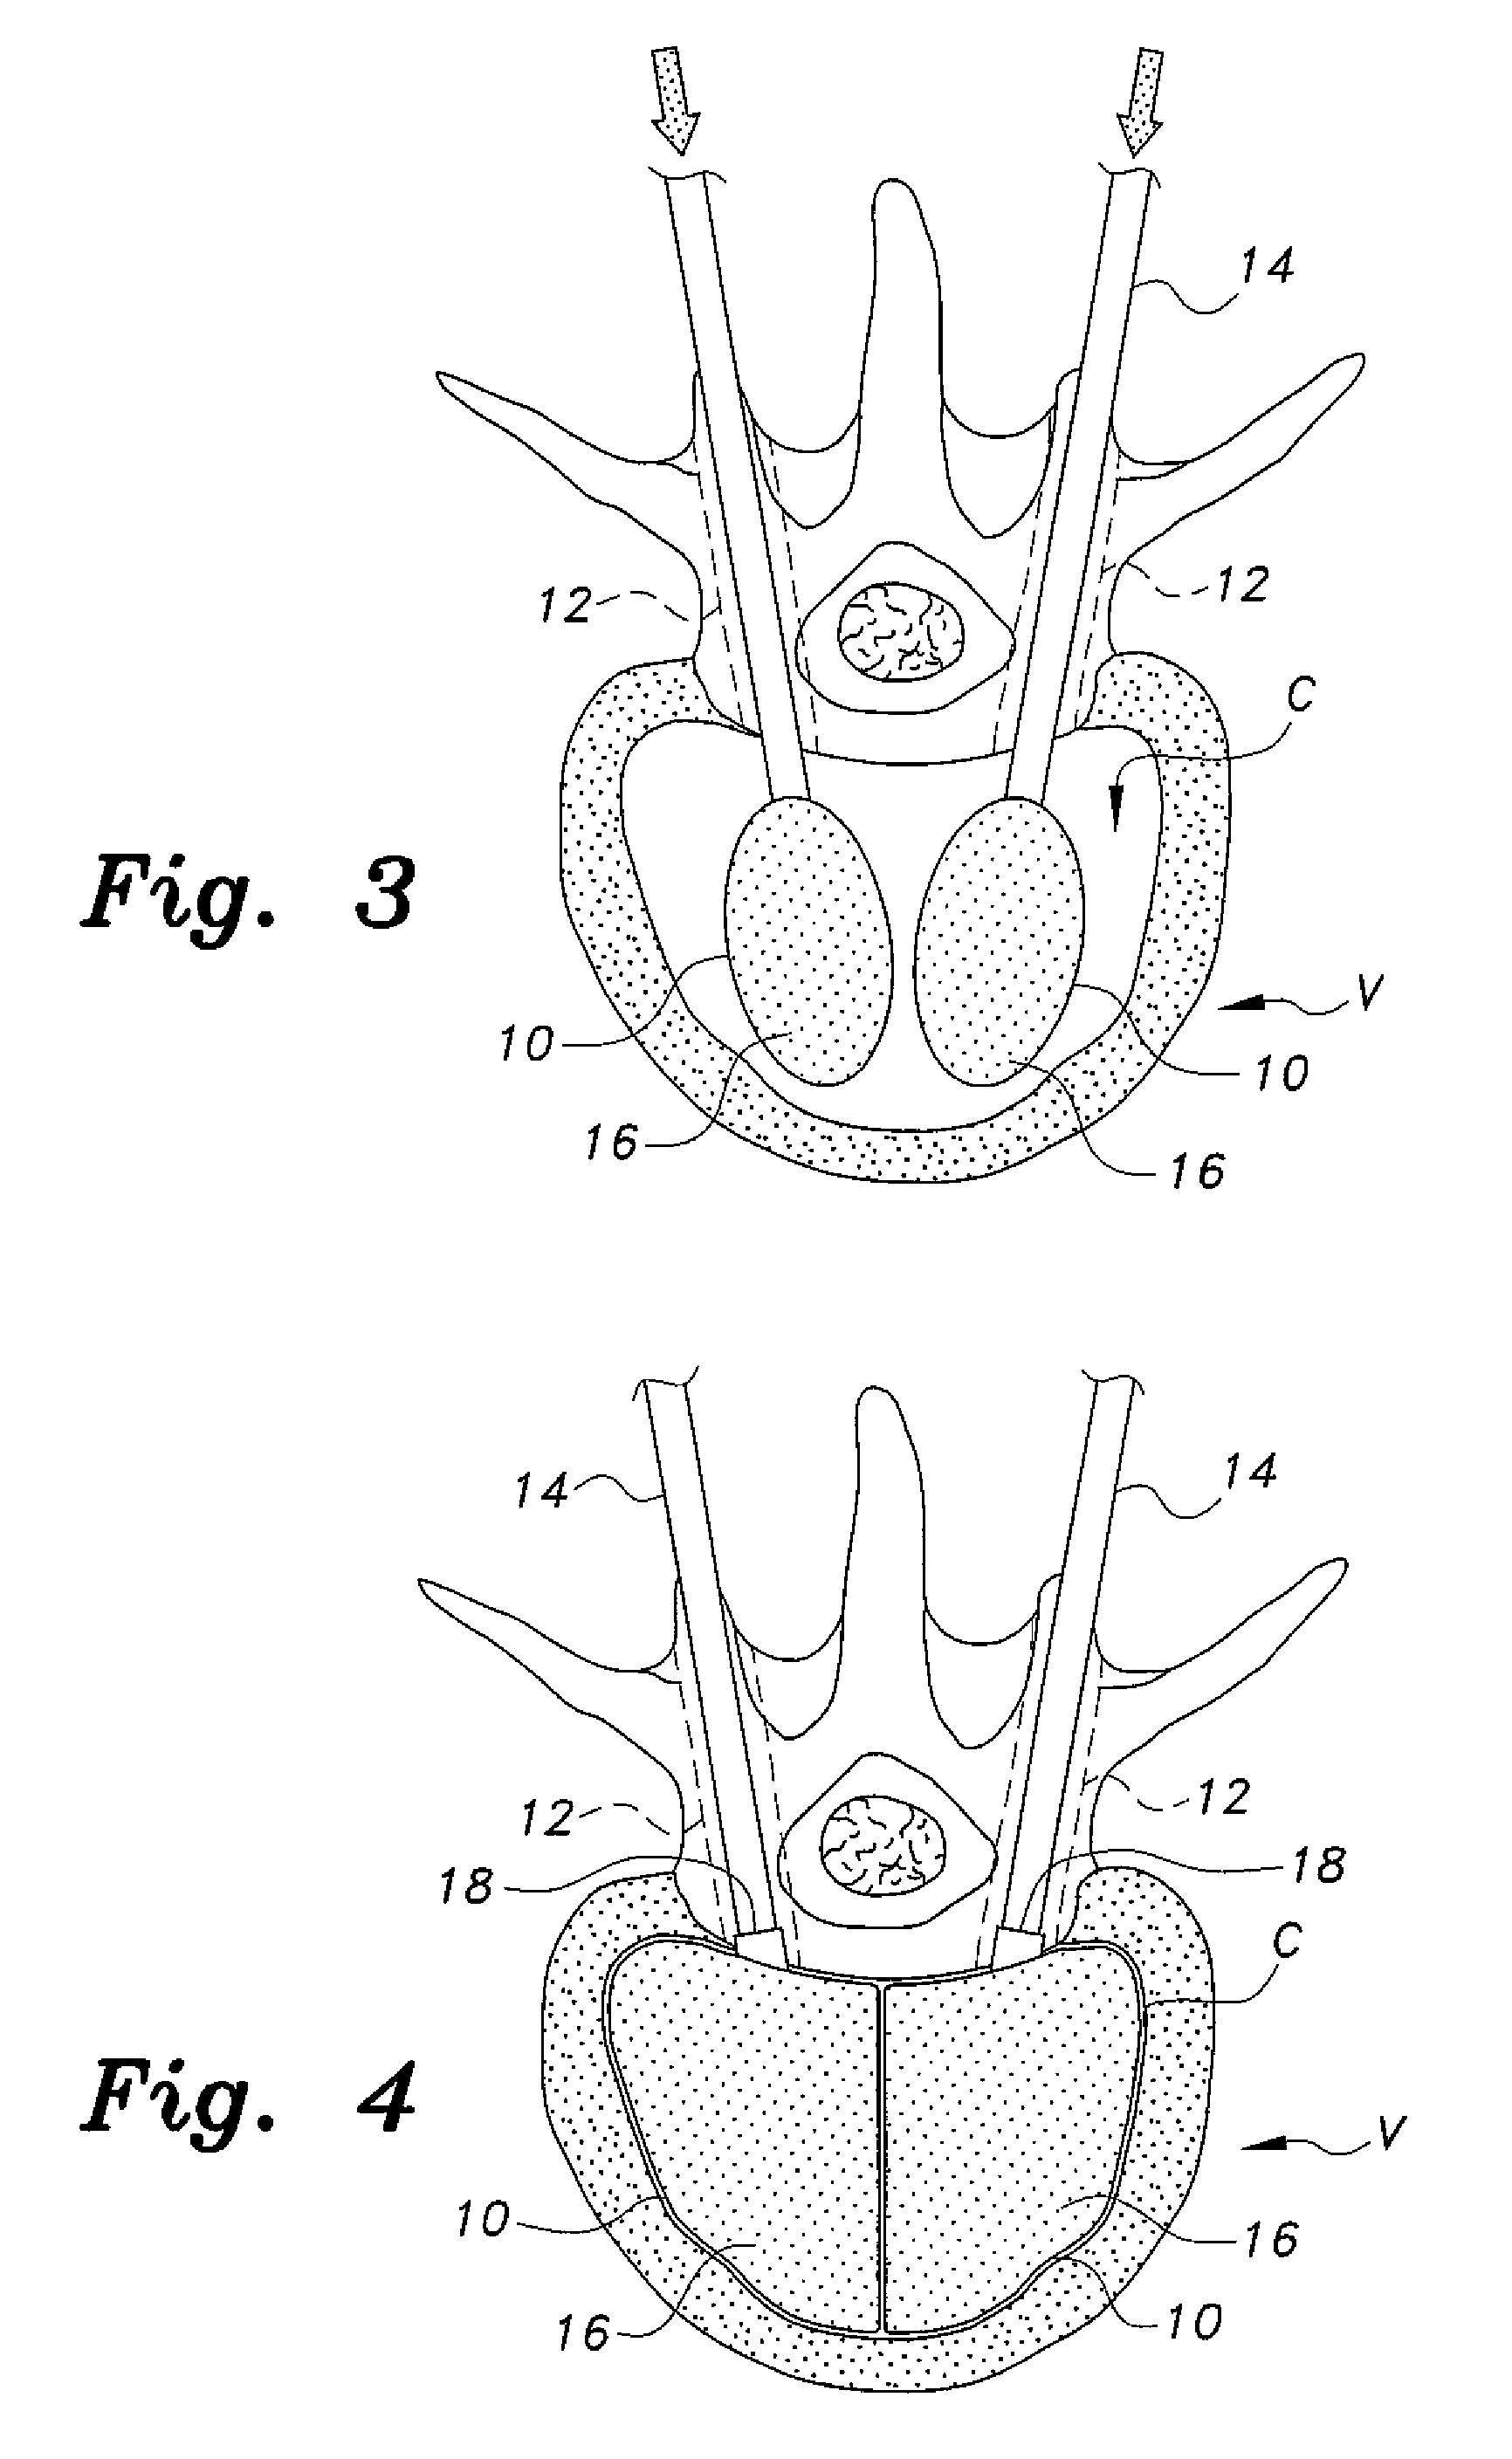 Device and method to prevent extravasation of bone cement used in balloon kyphoplasty